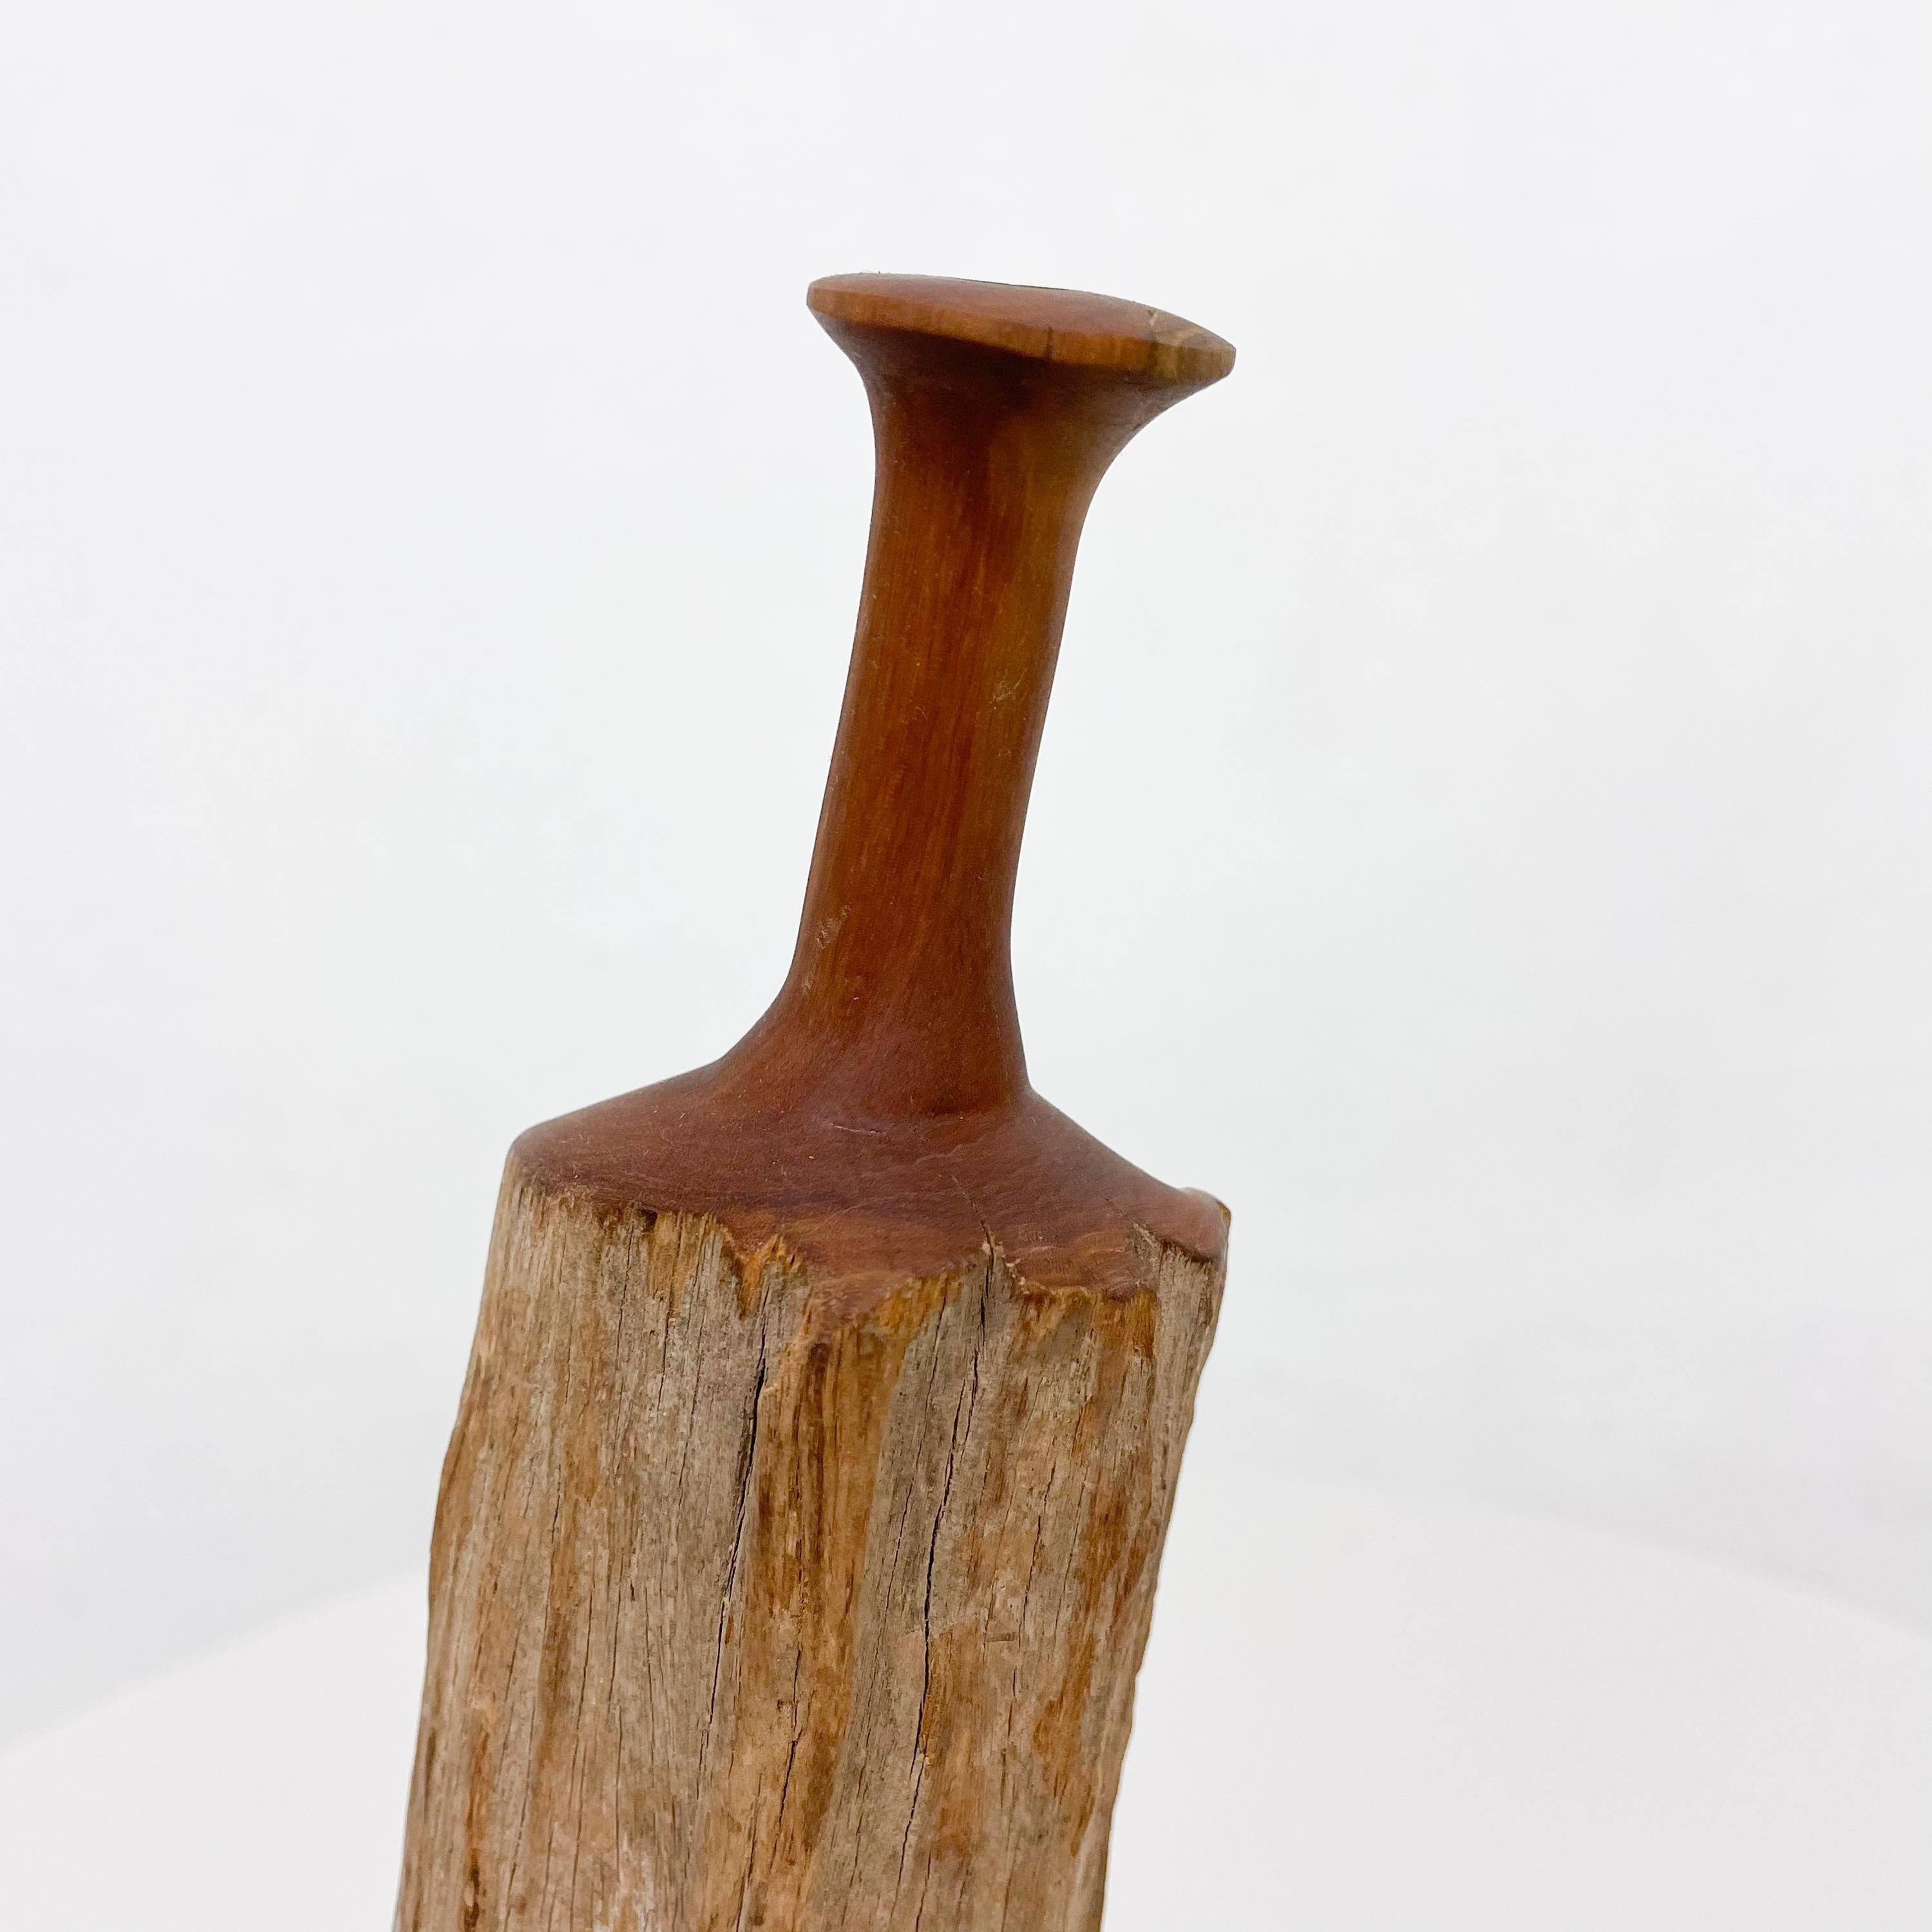 1970s Sculptural Studio Bud Vase Rustic Wood Weed Pot In Good Condition For Sale In Chula Vista, CA